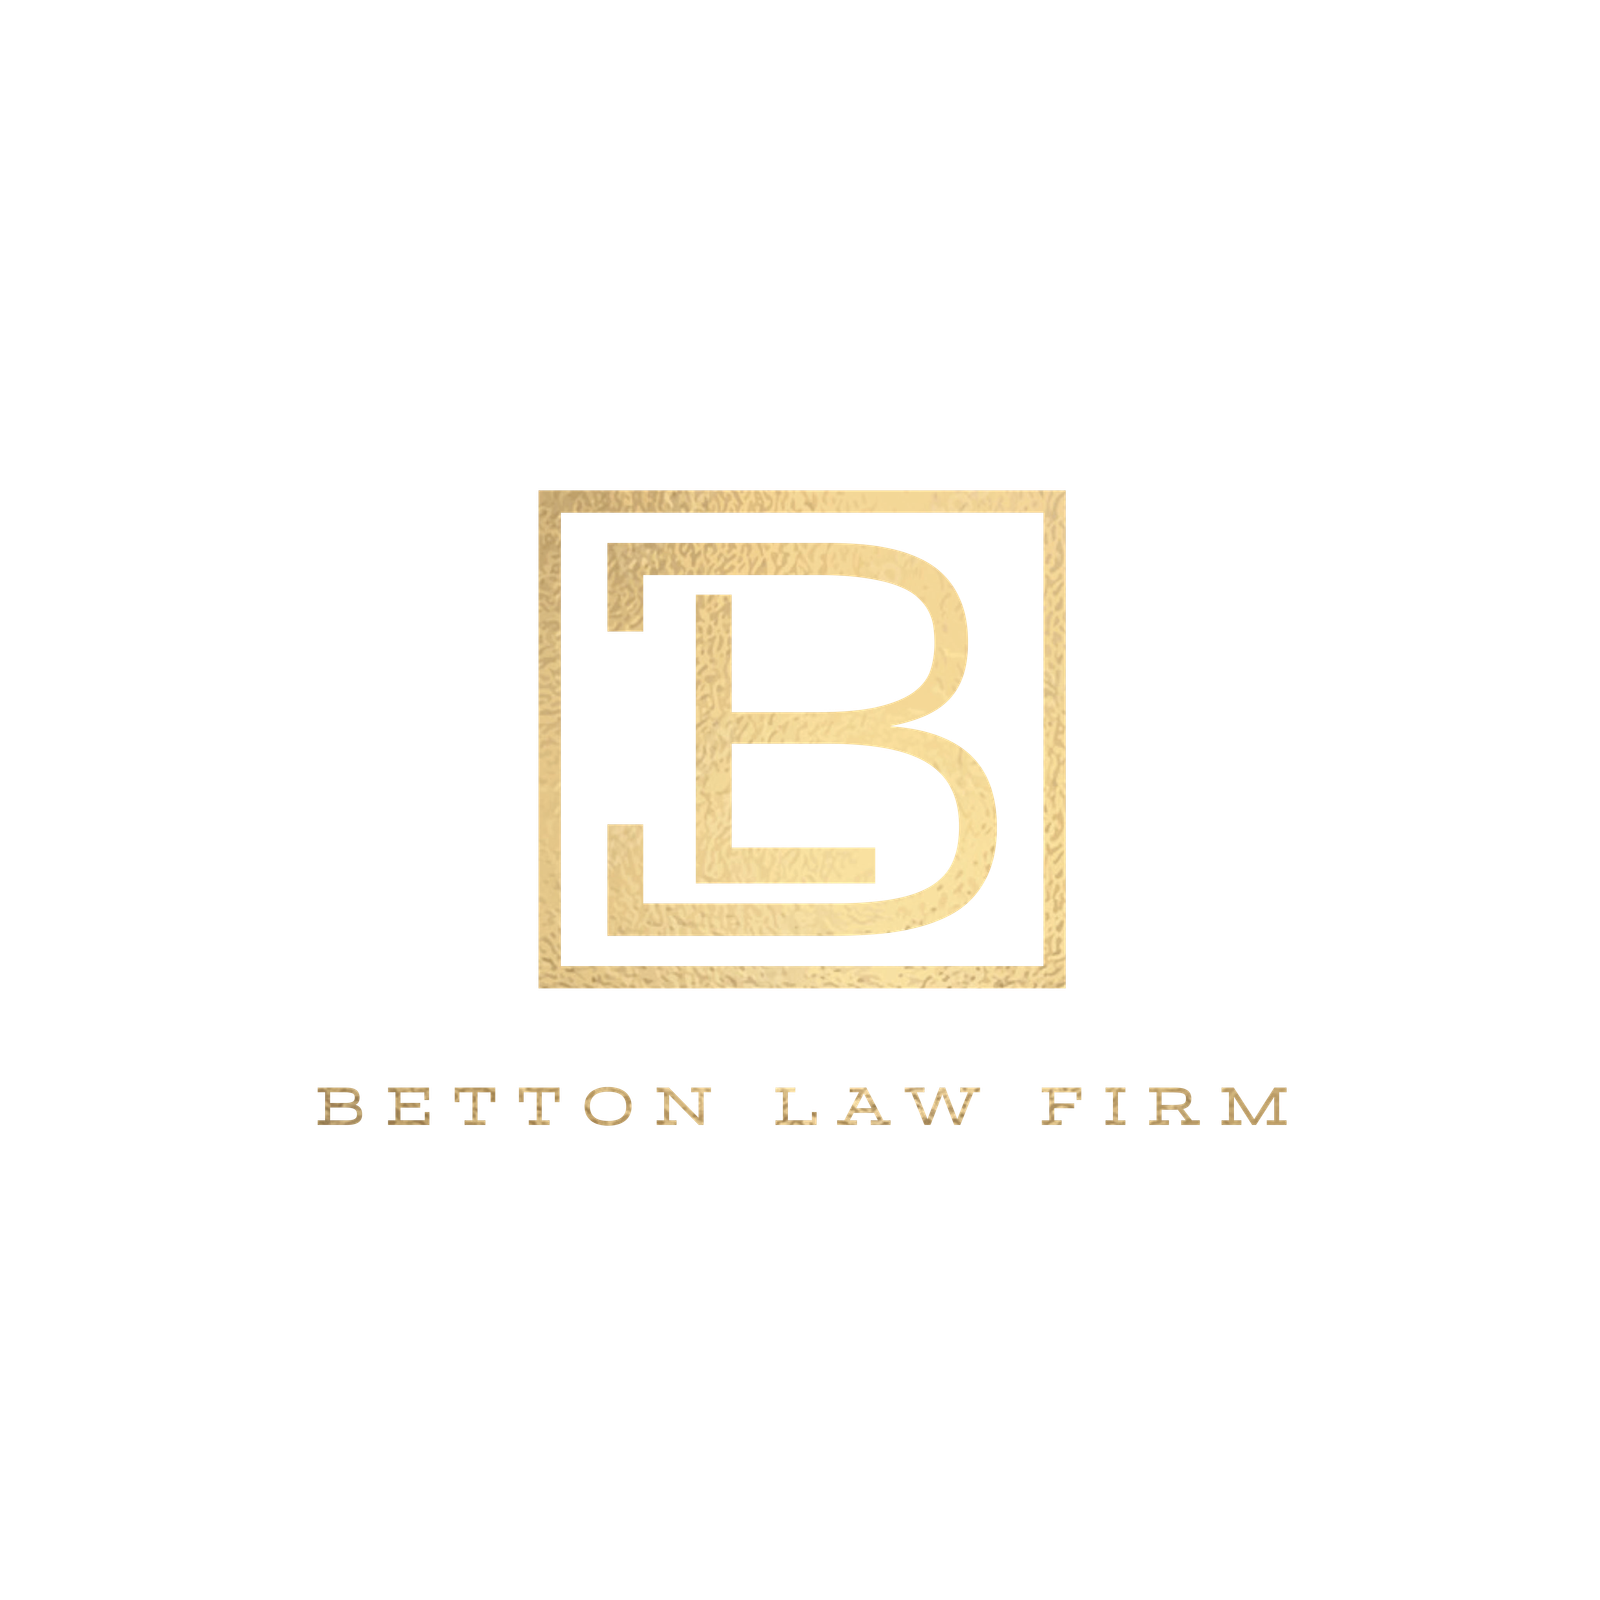 Official logo of Betton Law Firm